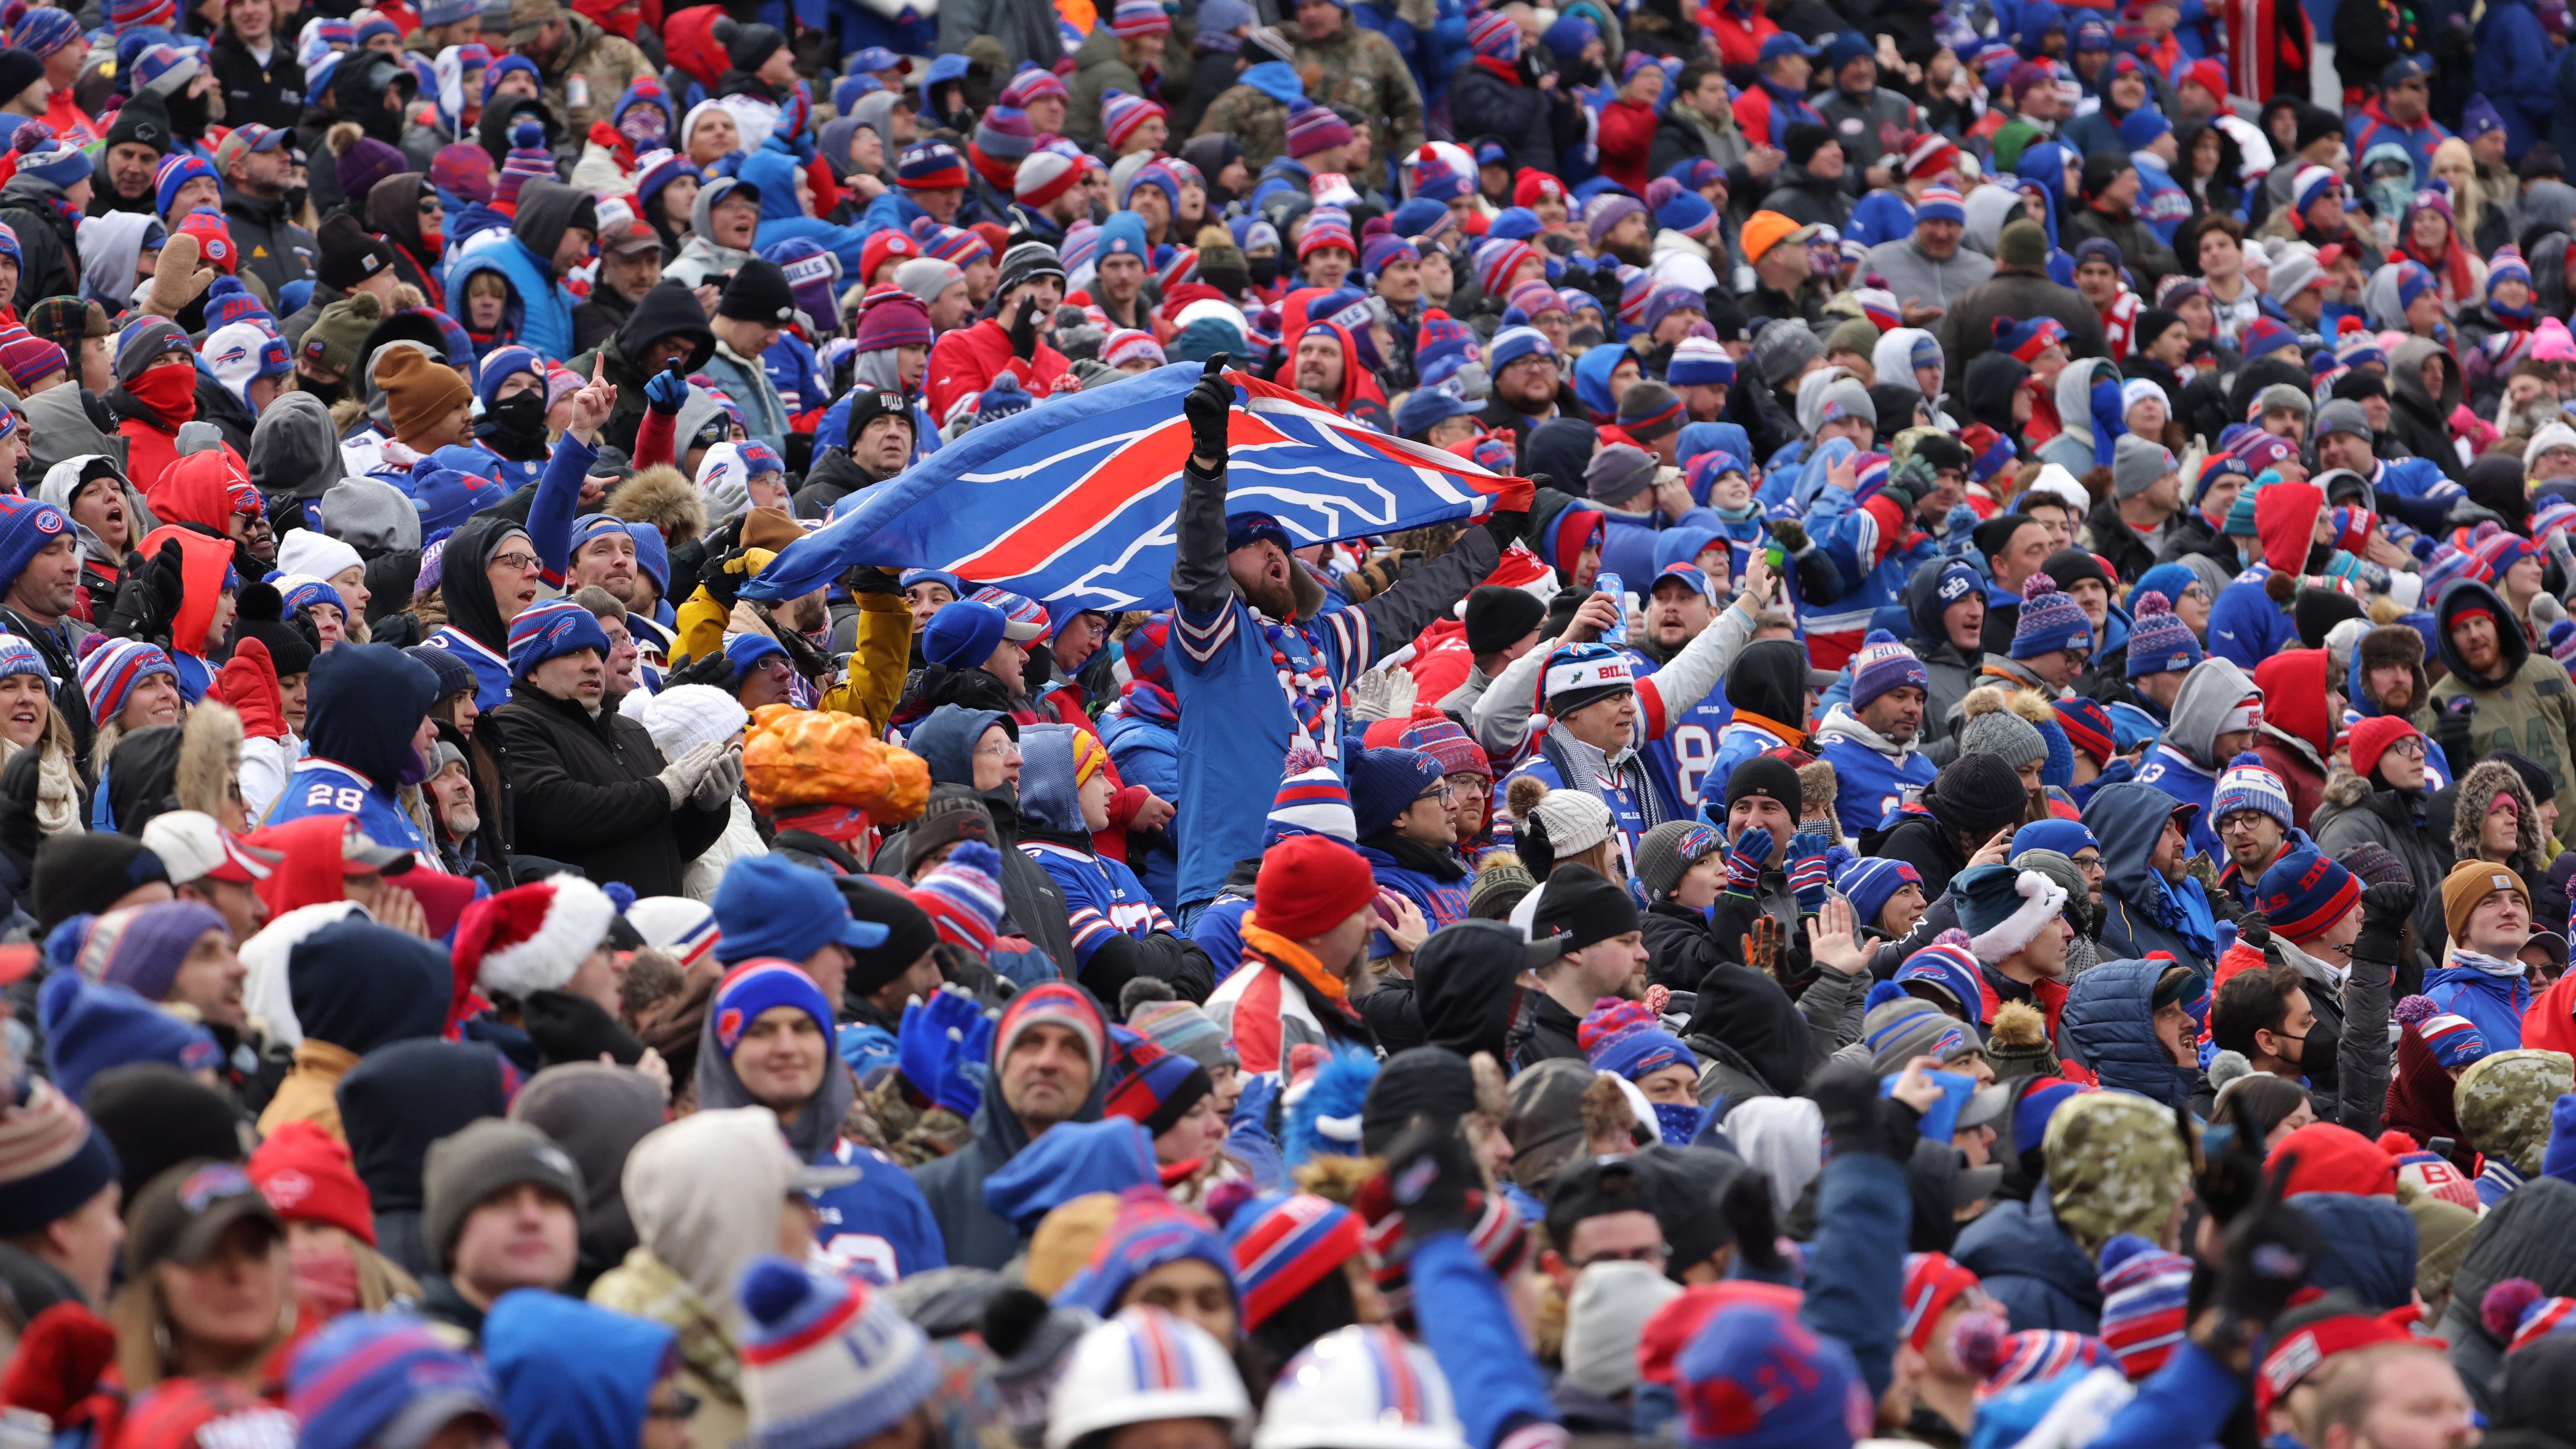 Bills update COVID vaccination policy at home games to include fans age 5  and older